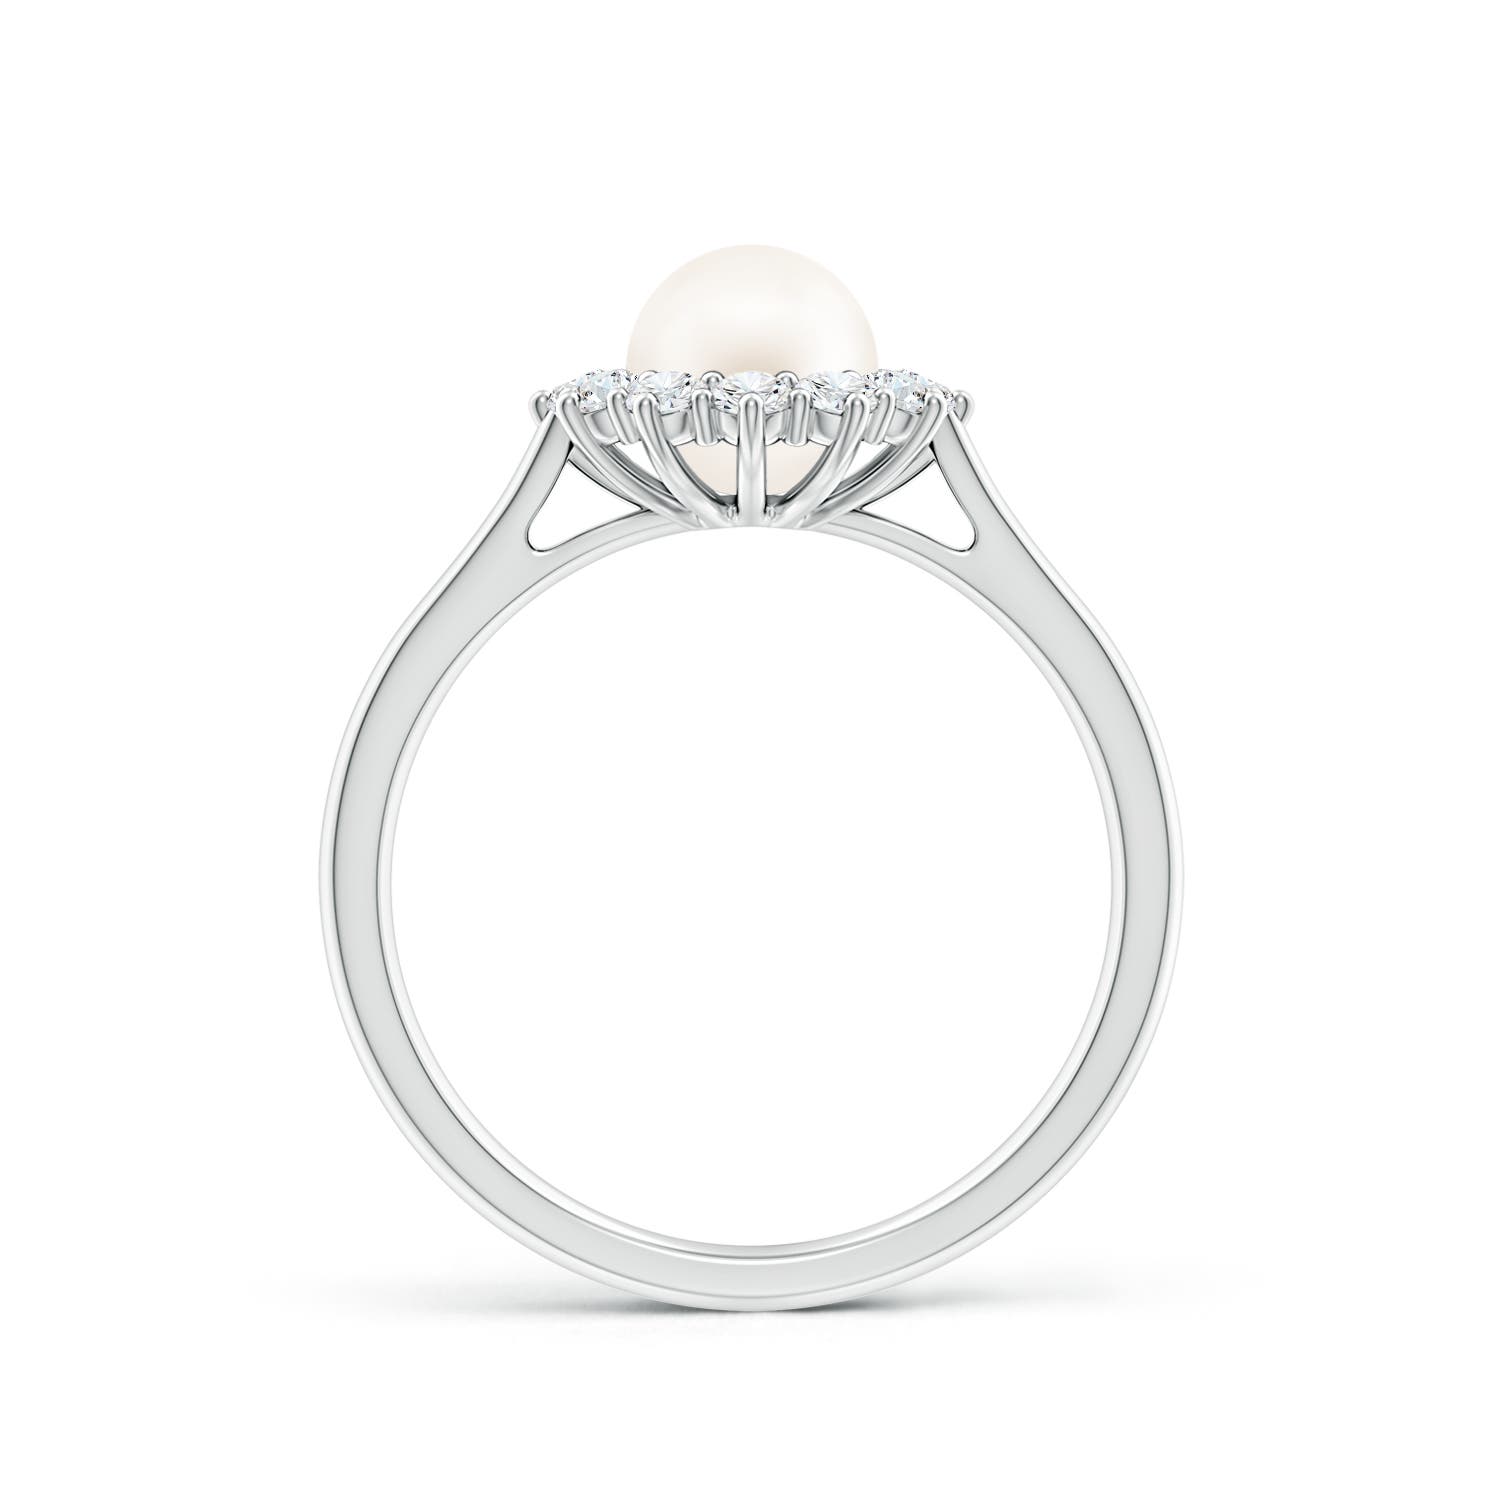 AA / 1.88 CT / 14 KT White Gold